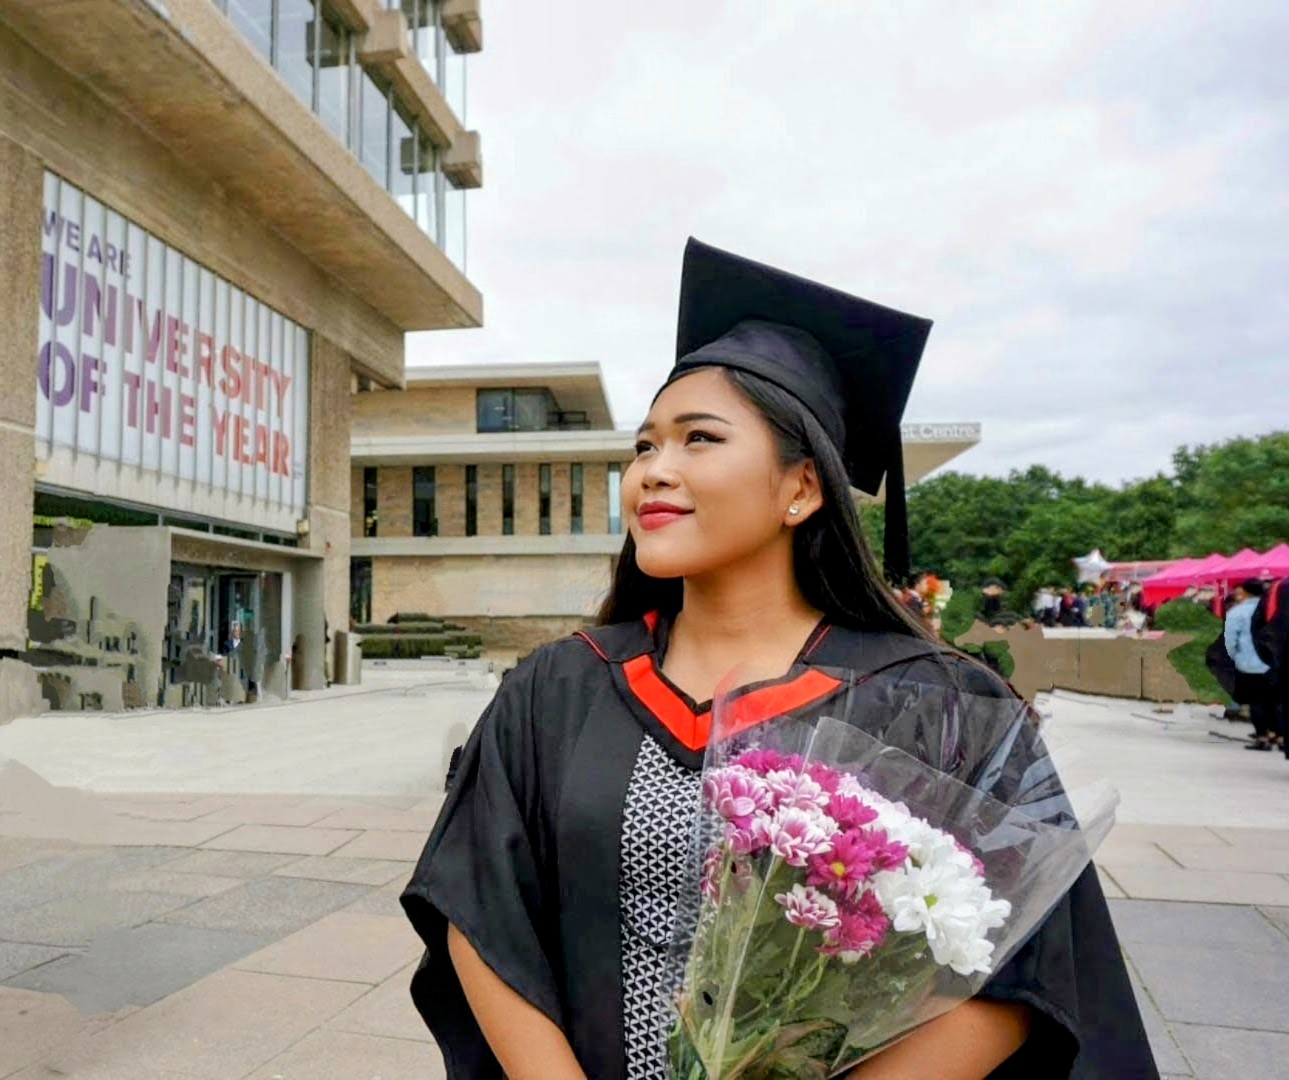 Fia Almanda wearing a graduation gown and holding flowers outside